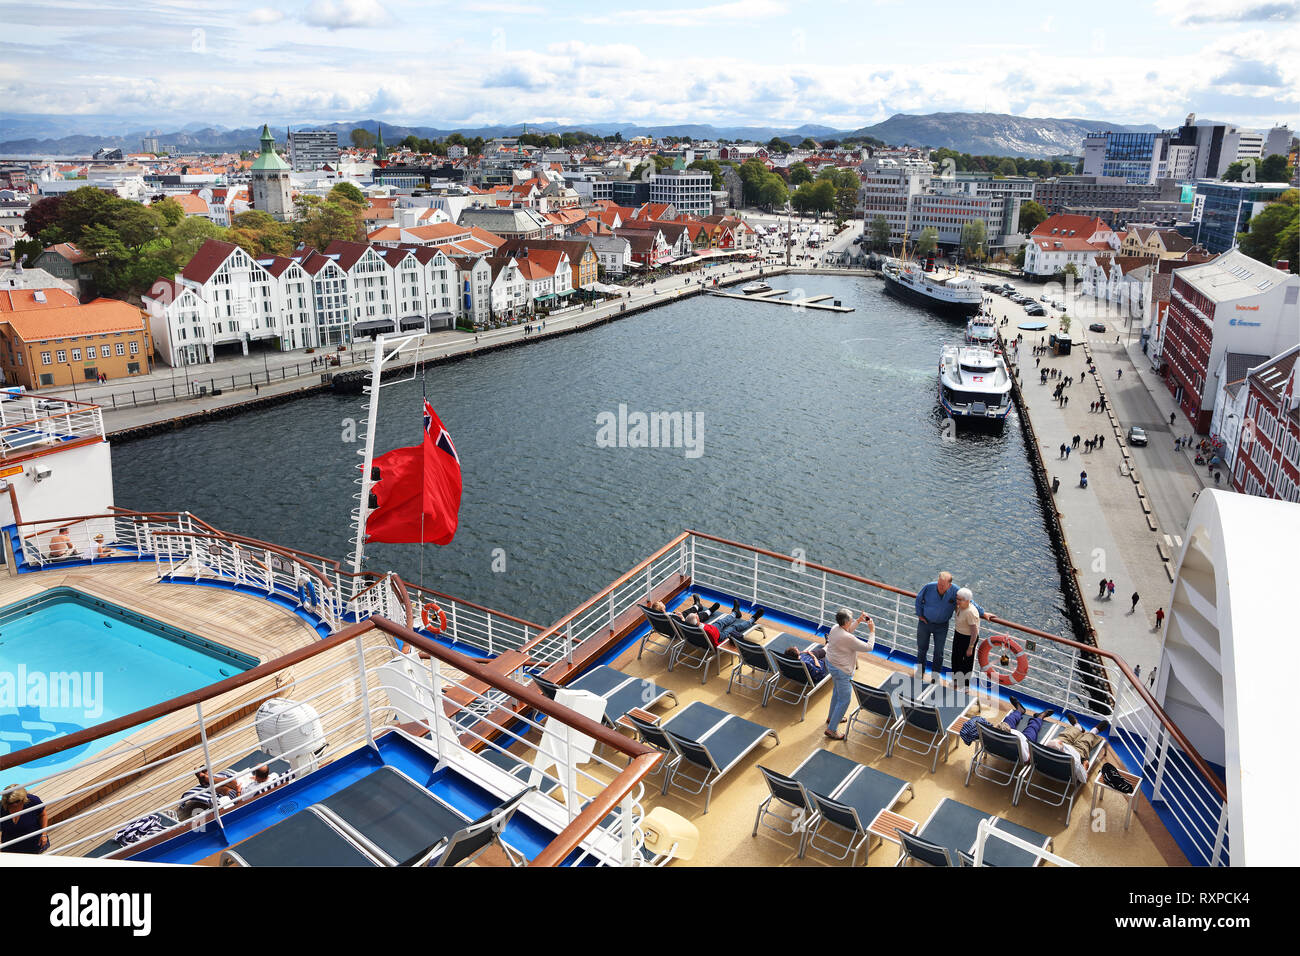 Couple posing for a photo on the upper deck of a cruise ship with Vagen Bay and the city of Stavanger, Norway, in the background. Stock Photo